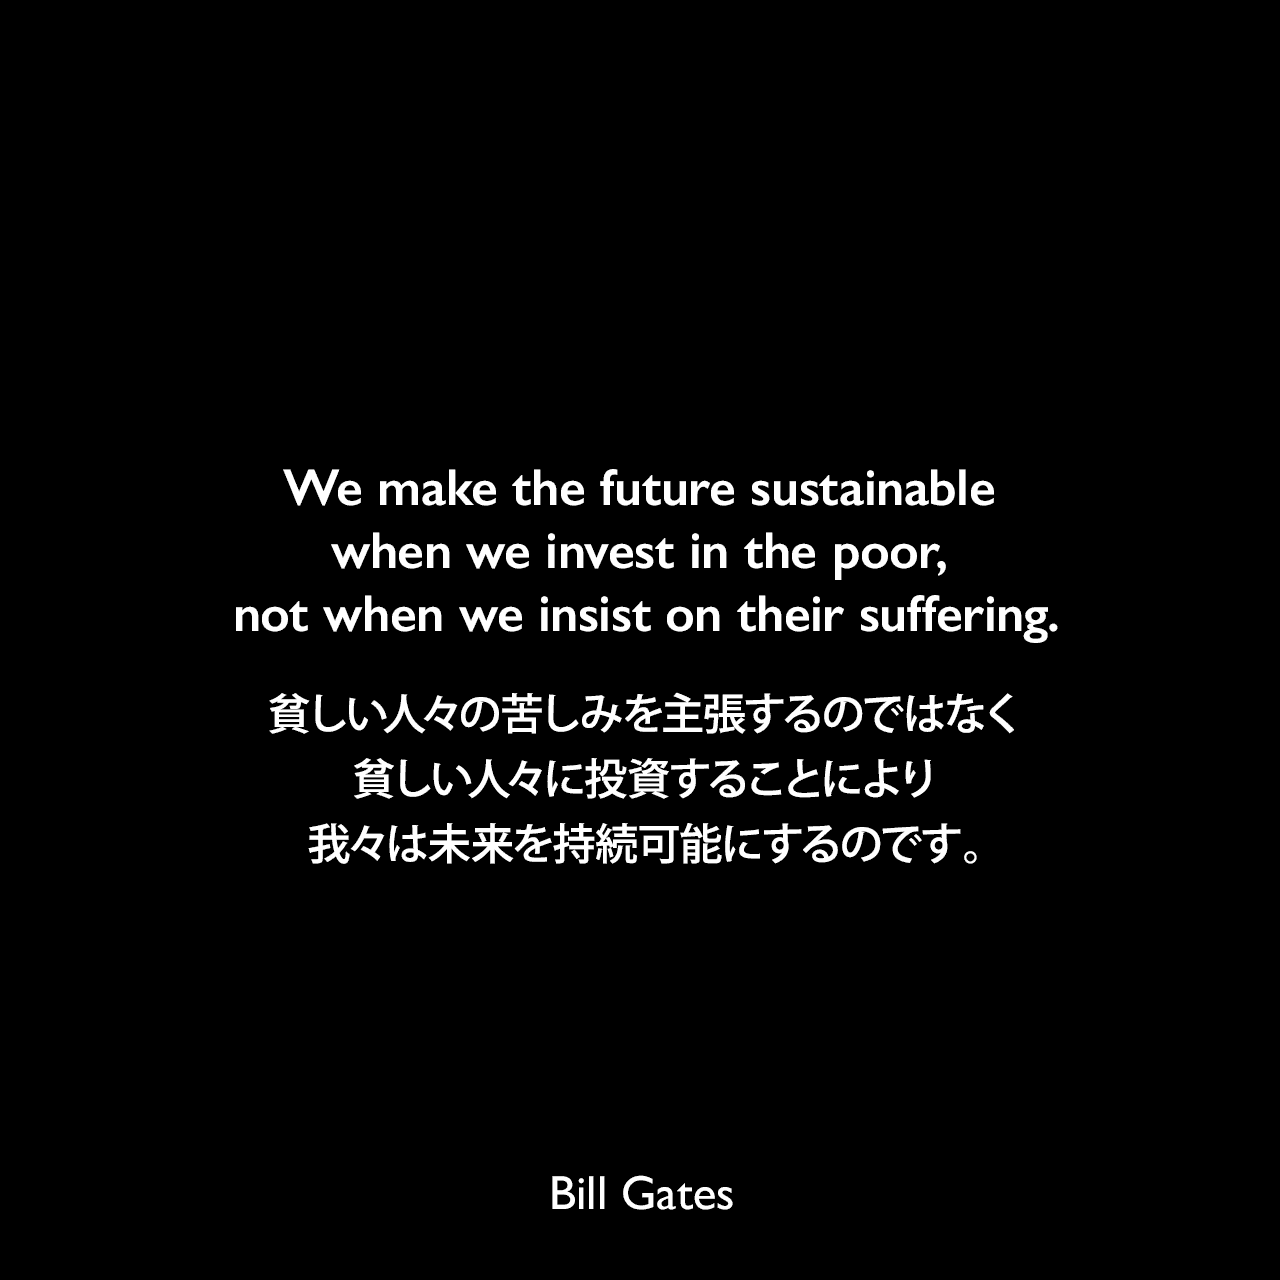 We make the future sustainable when we invest in the poor, not when we insist on their suffering.貧しい人々の苦しみを主張するのではなく、貧しい人々に投資することにより、我々は未来を持続可能にするのです。Bill Gates